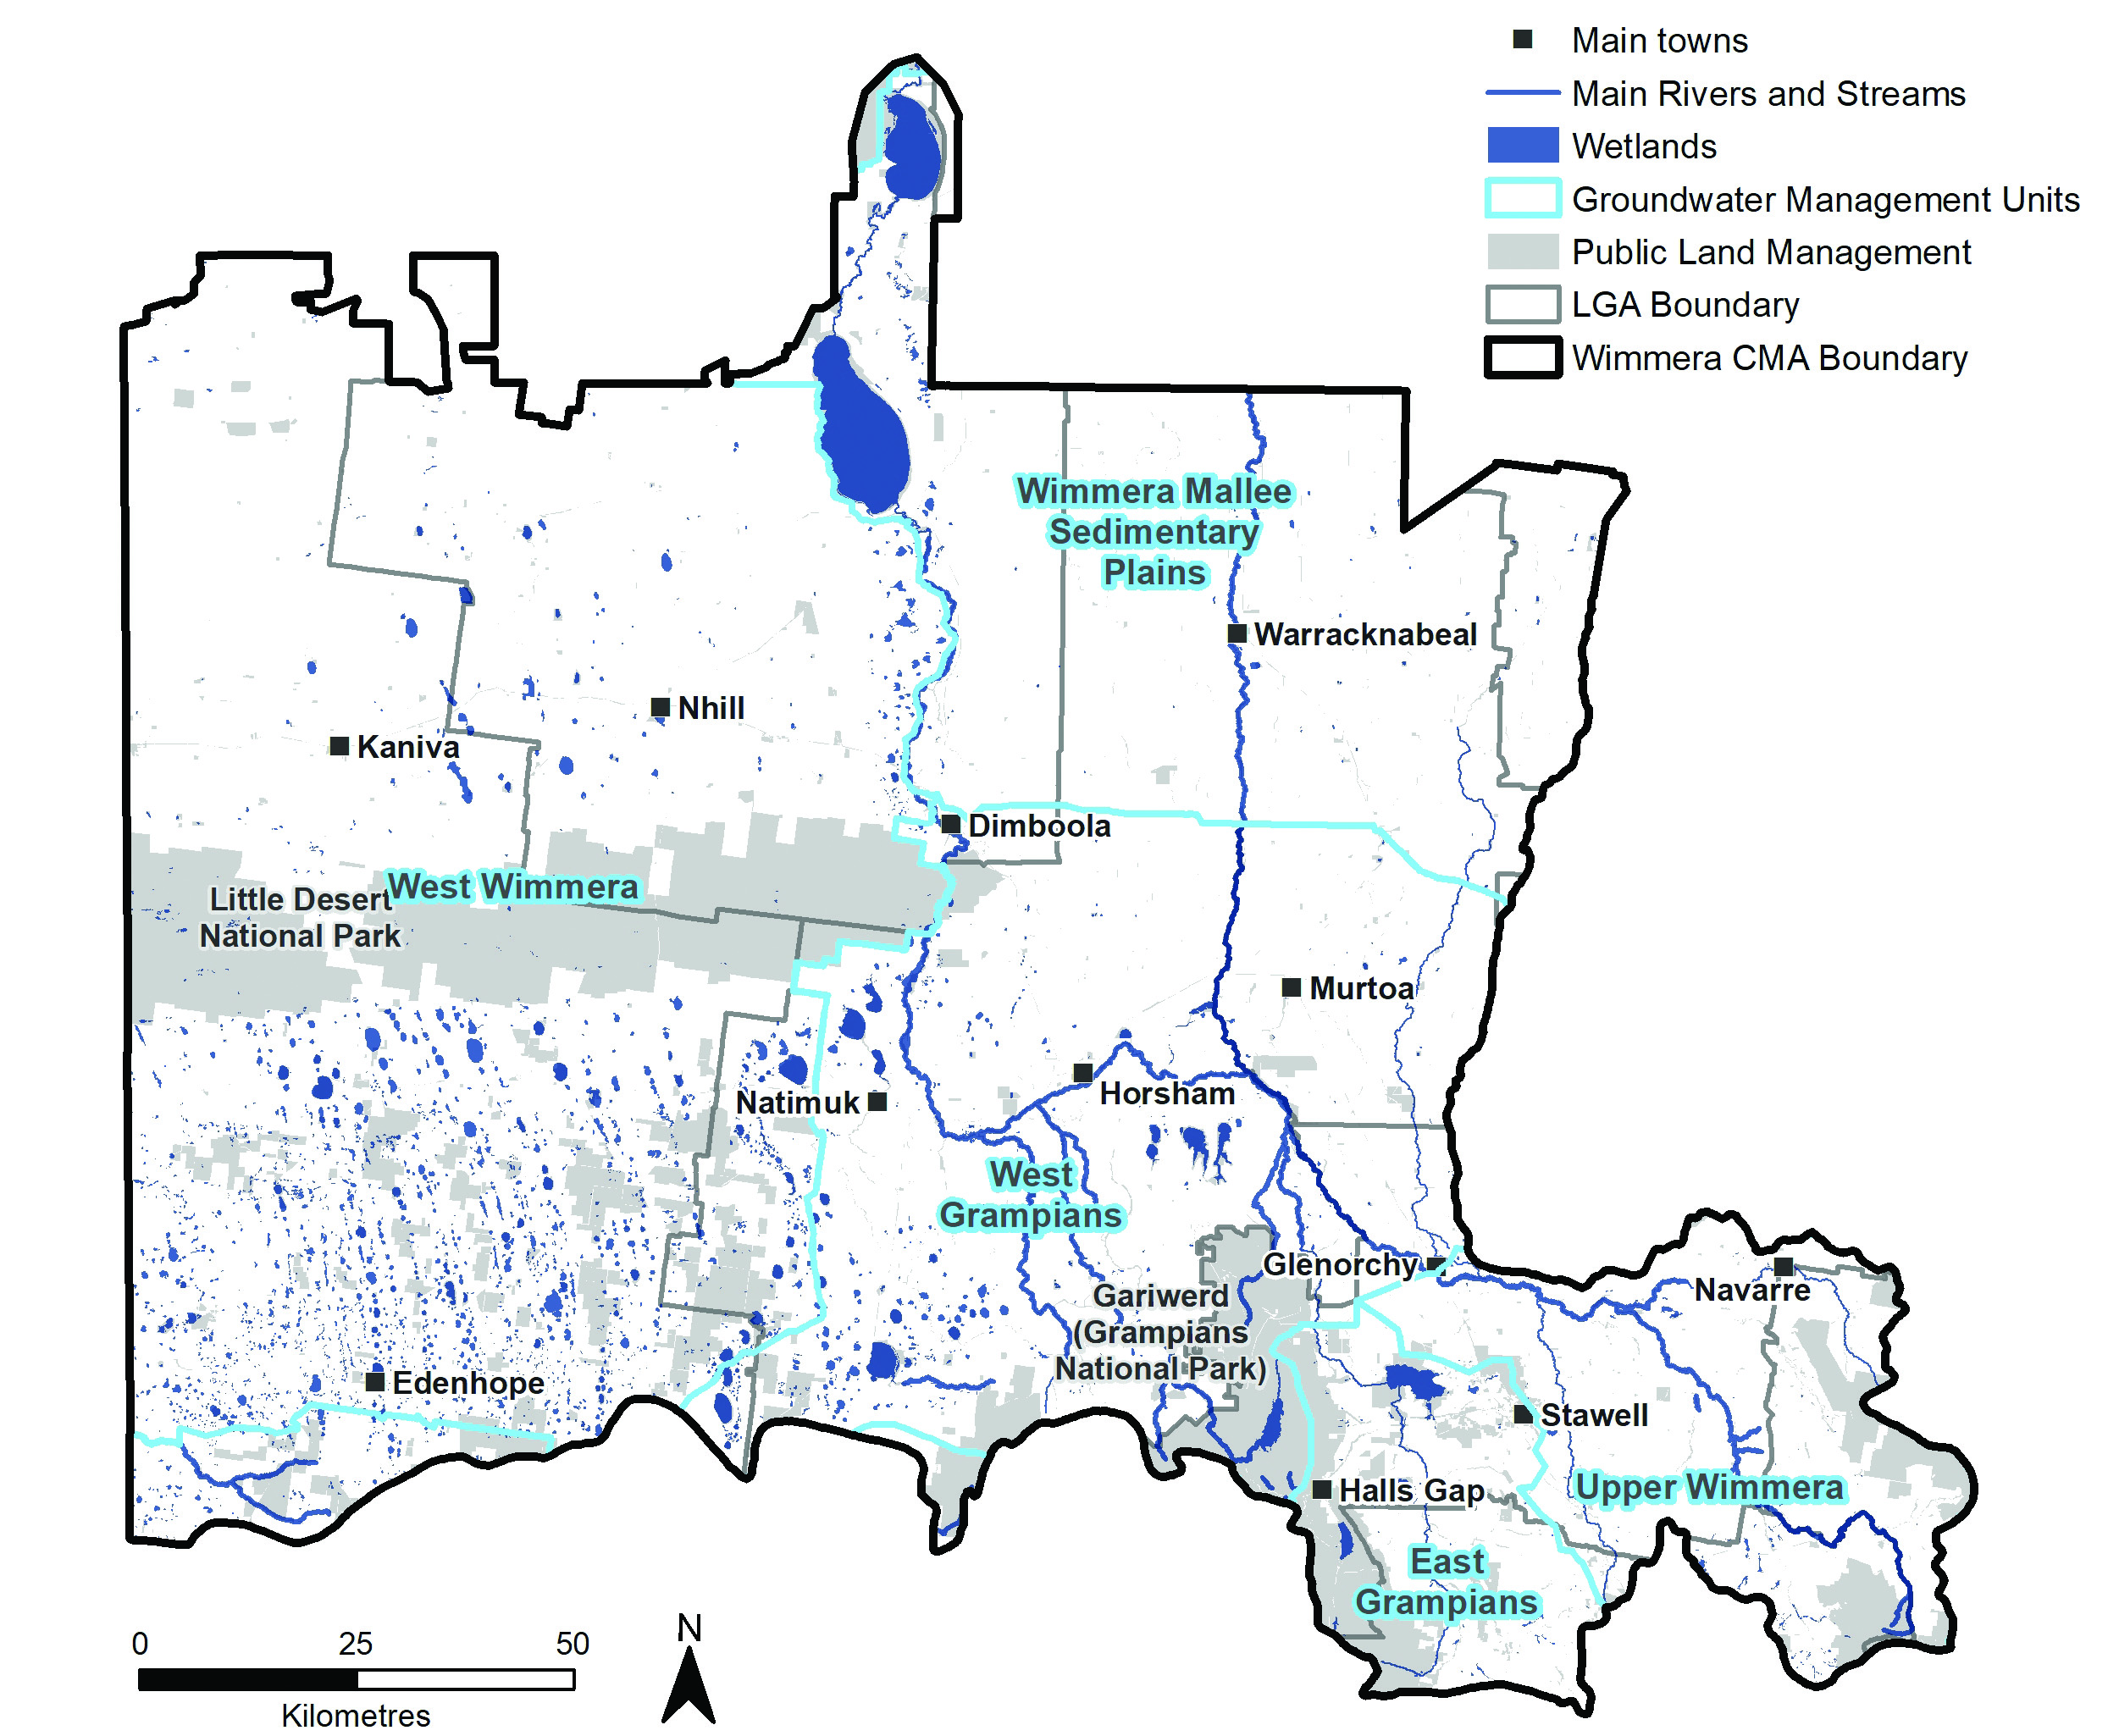 Figure 9: Wimmera groundwater zones.
There are 5 Groundwater Management Zones in the Wimmera; West Wimmera, Wimmera Mallee Sedimentary Plains, West Grampians, East Grampians and Upper Wimmera.